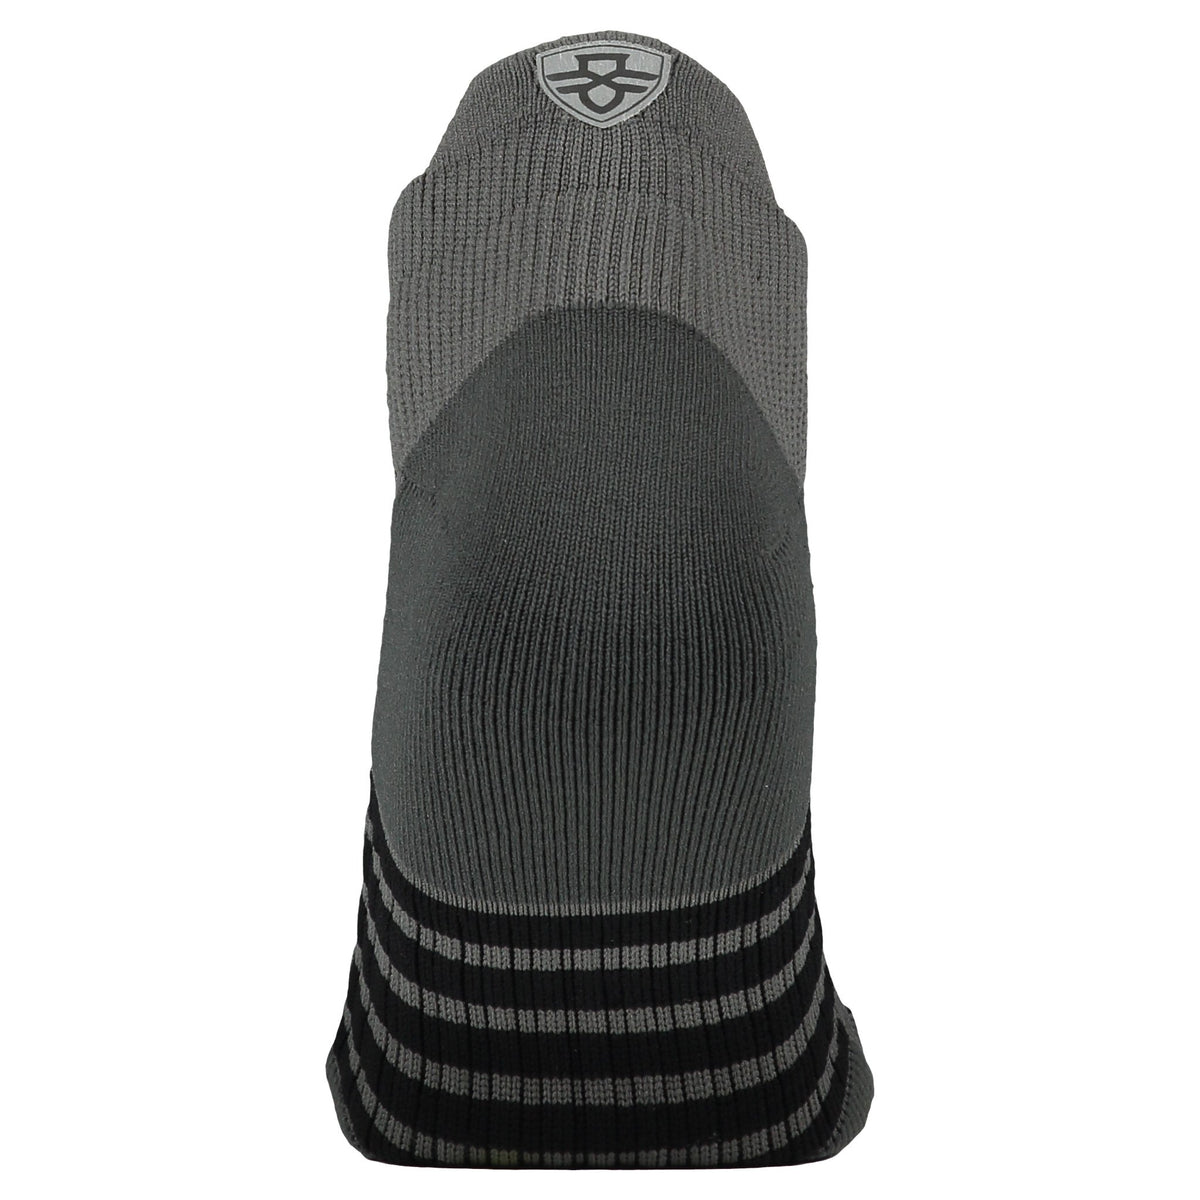 Crossfly men&#39;s Vent Low Socks in grey / black from the Performance series, featuring AirVent and AirBeams.